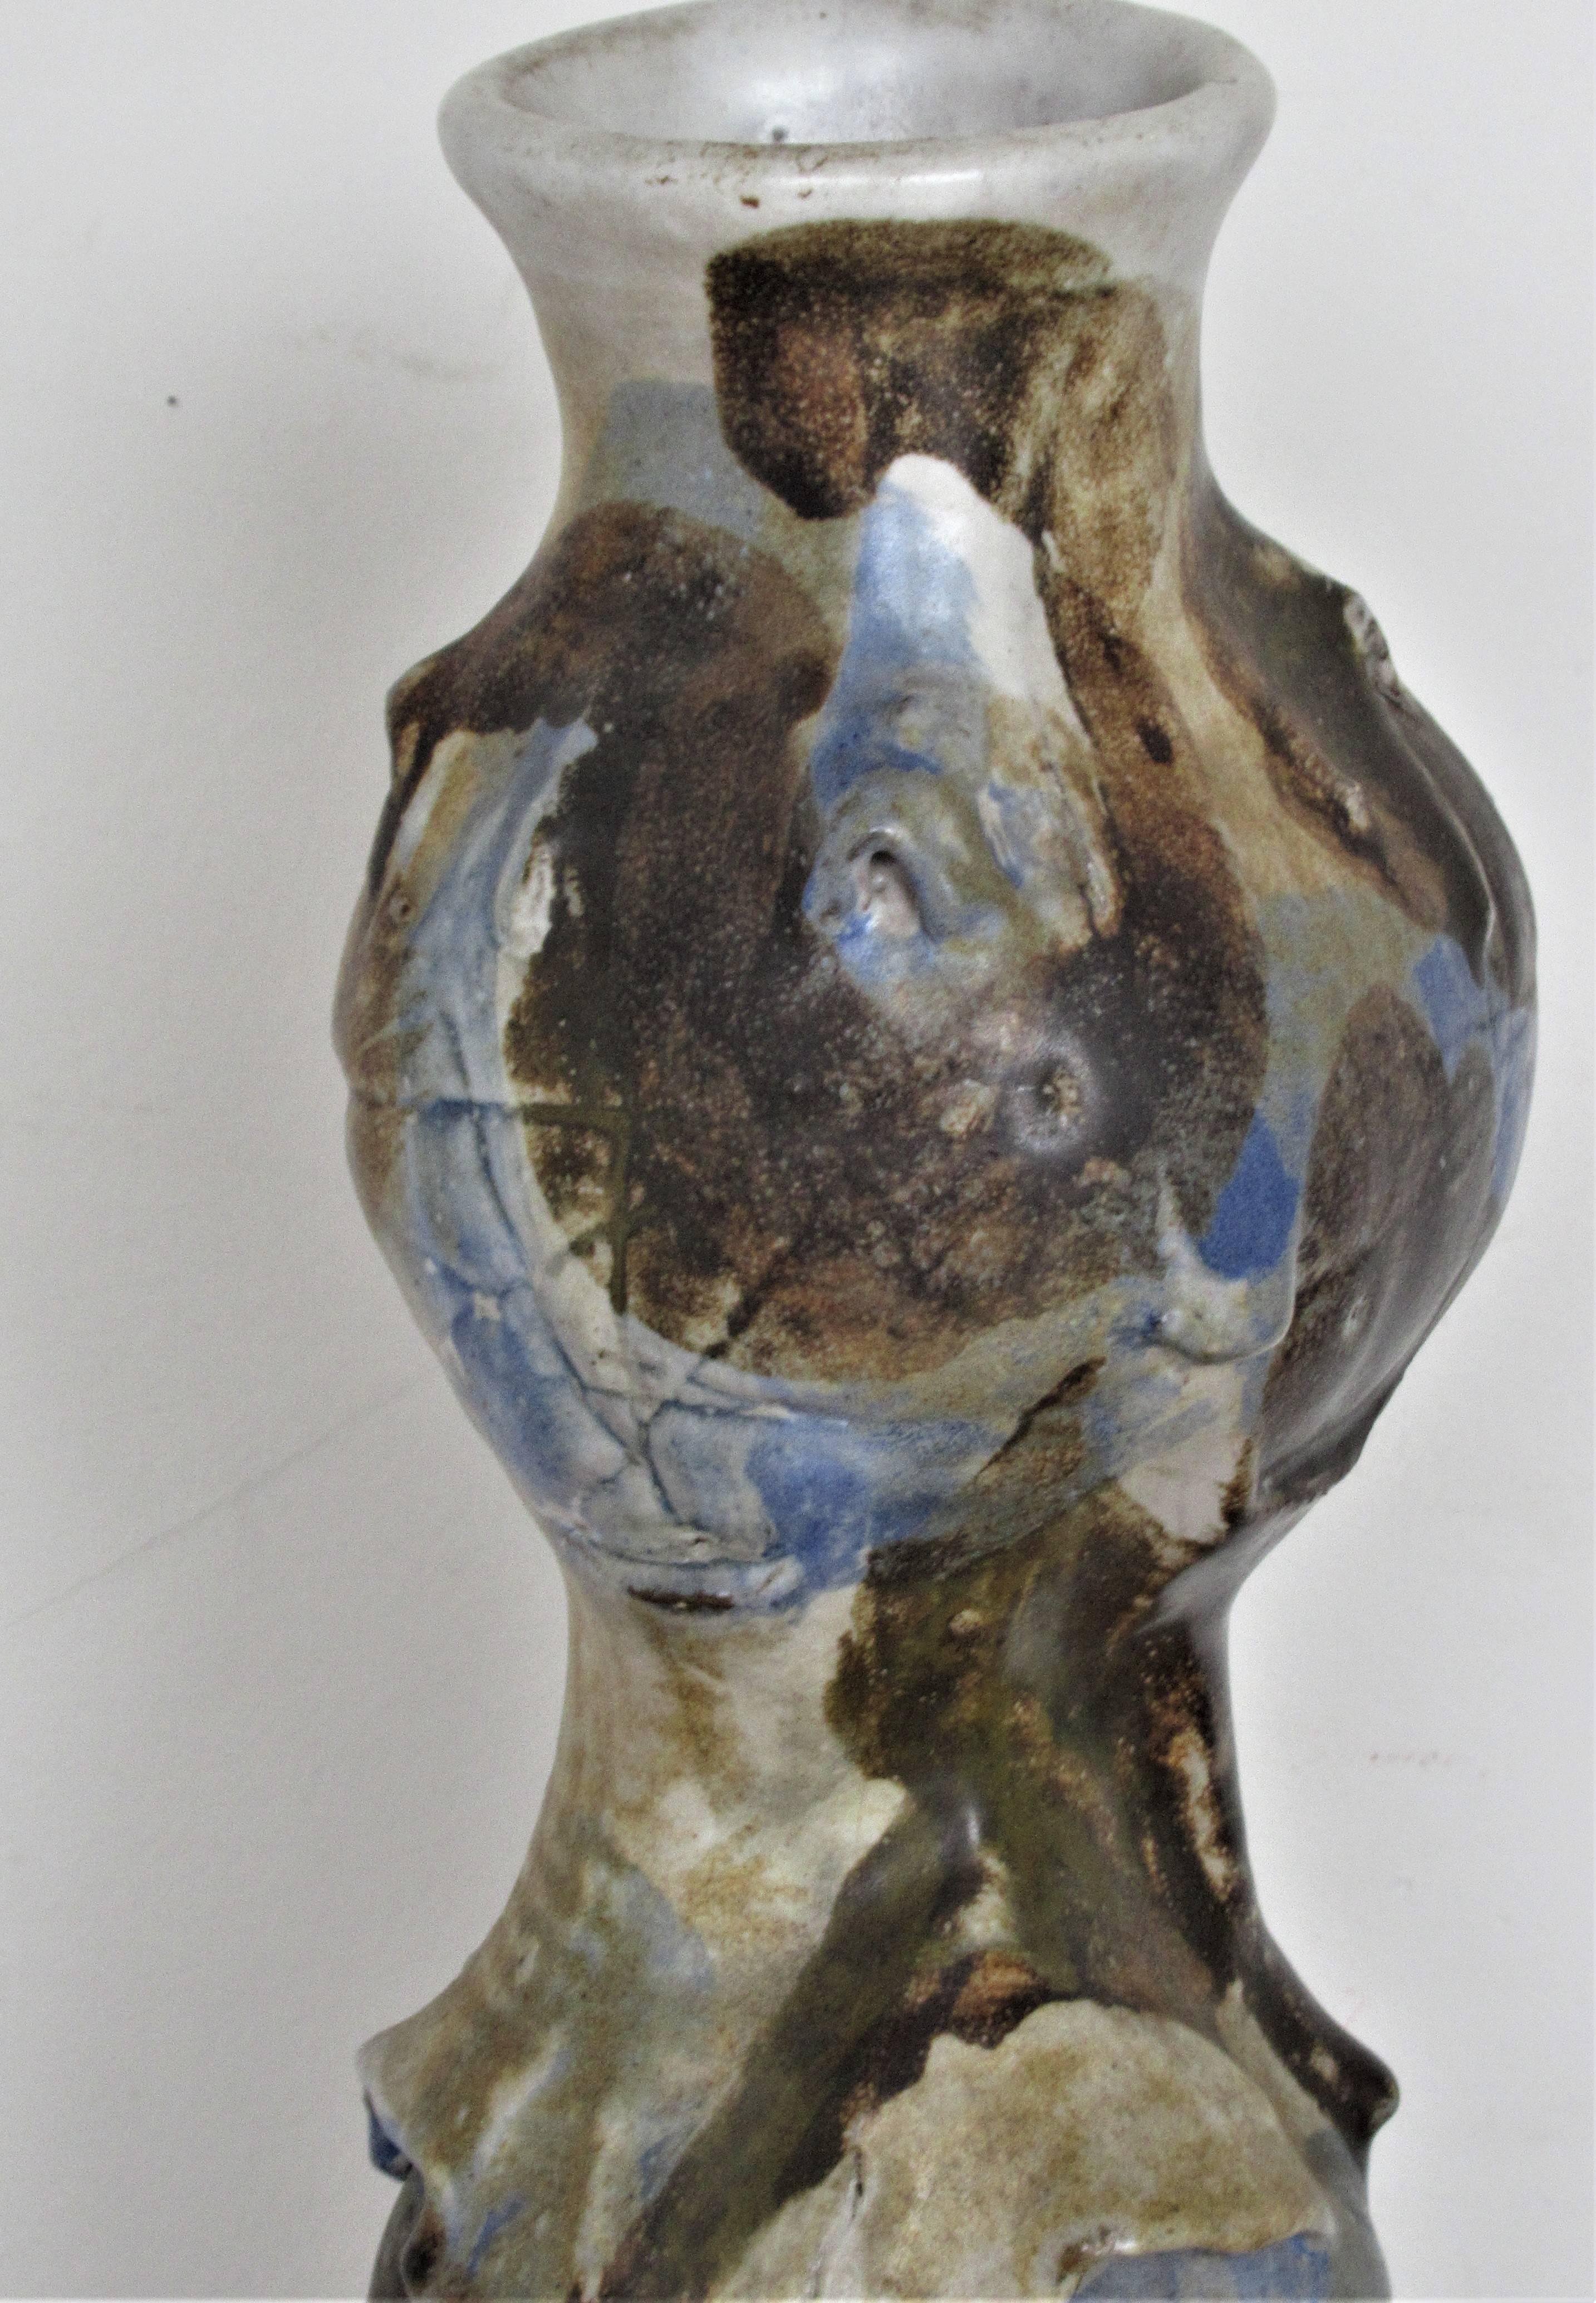 A sculptural totemic abstract polychrome glazed ceramic vessel by award winning American artist sculptor William F. Sellers a Rochester, NY contemporary of Wendell Castle / Frans Wildenhain / Marguerite Wildenhain as well as other School for